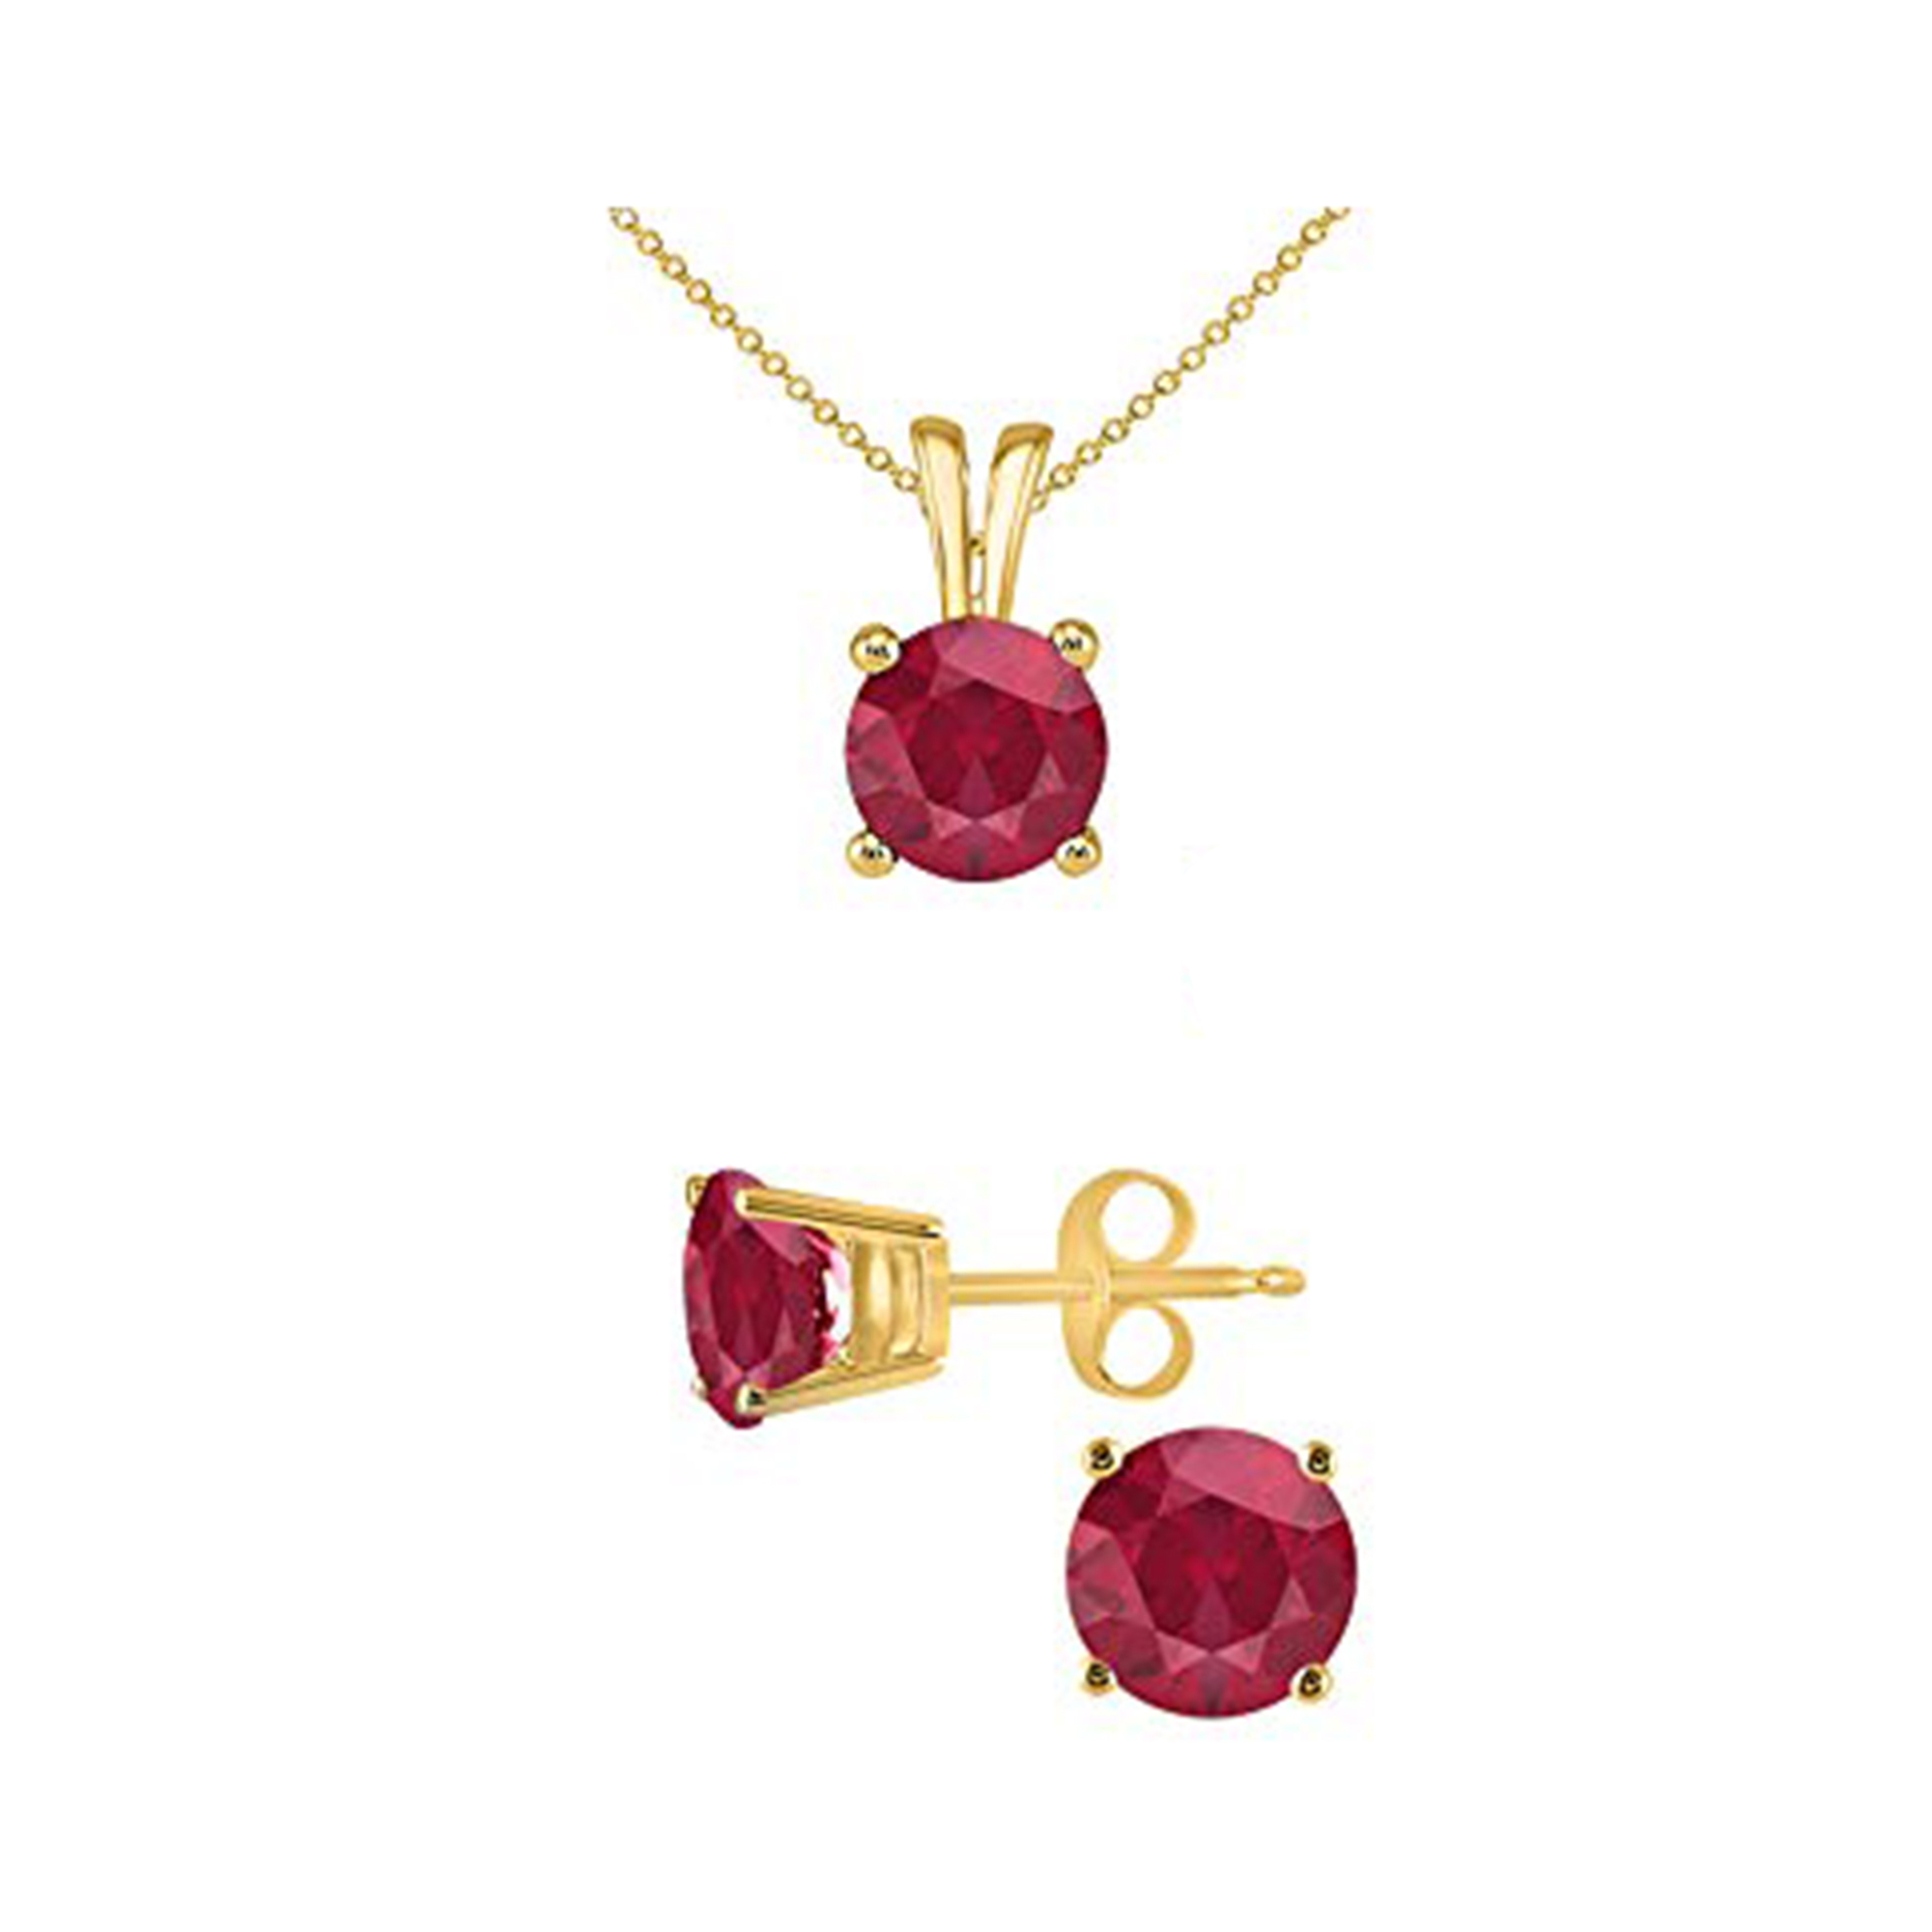 Bonjour Jewelers 4 Cttw Round Ruby 18 Inch Necklace In Earring Set 24k Gold Plated